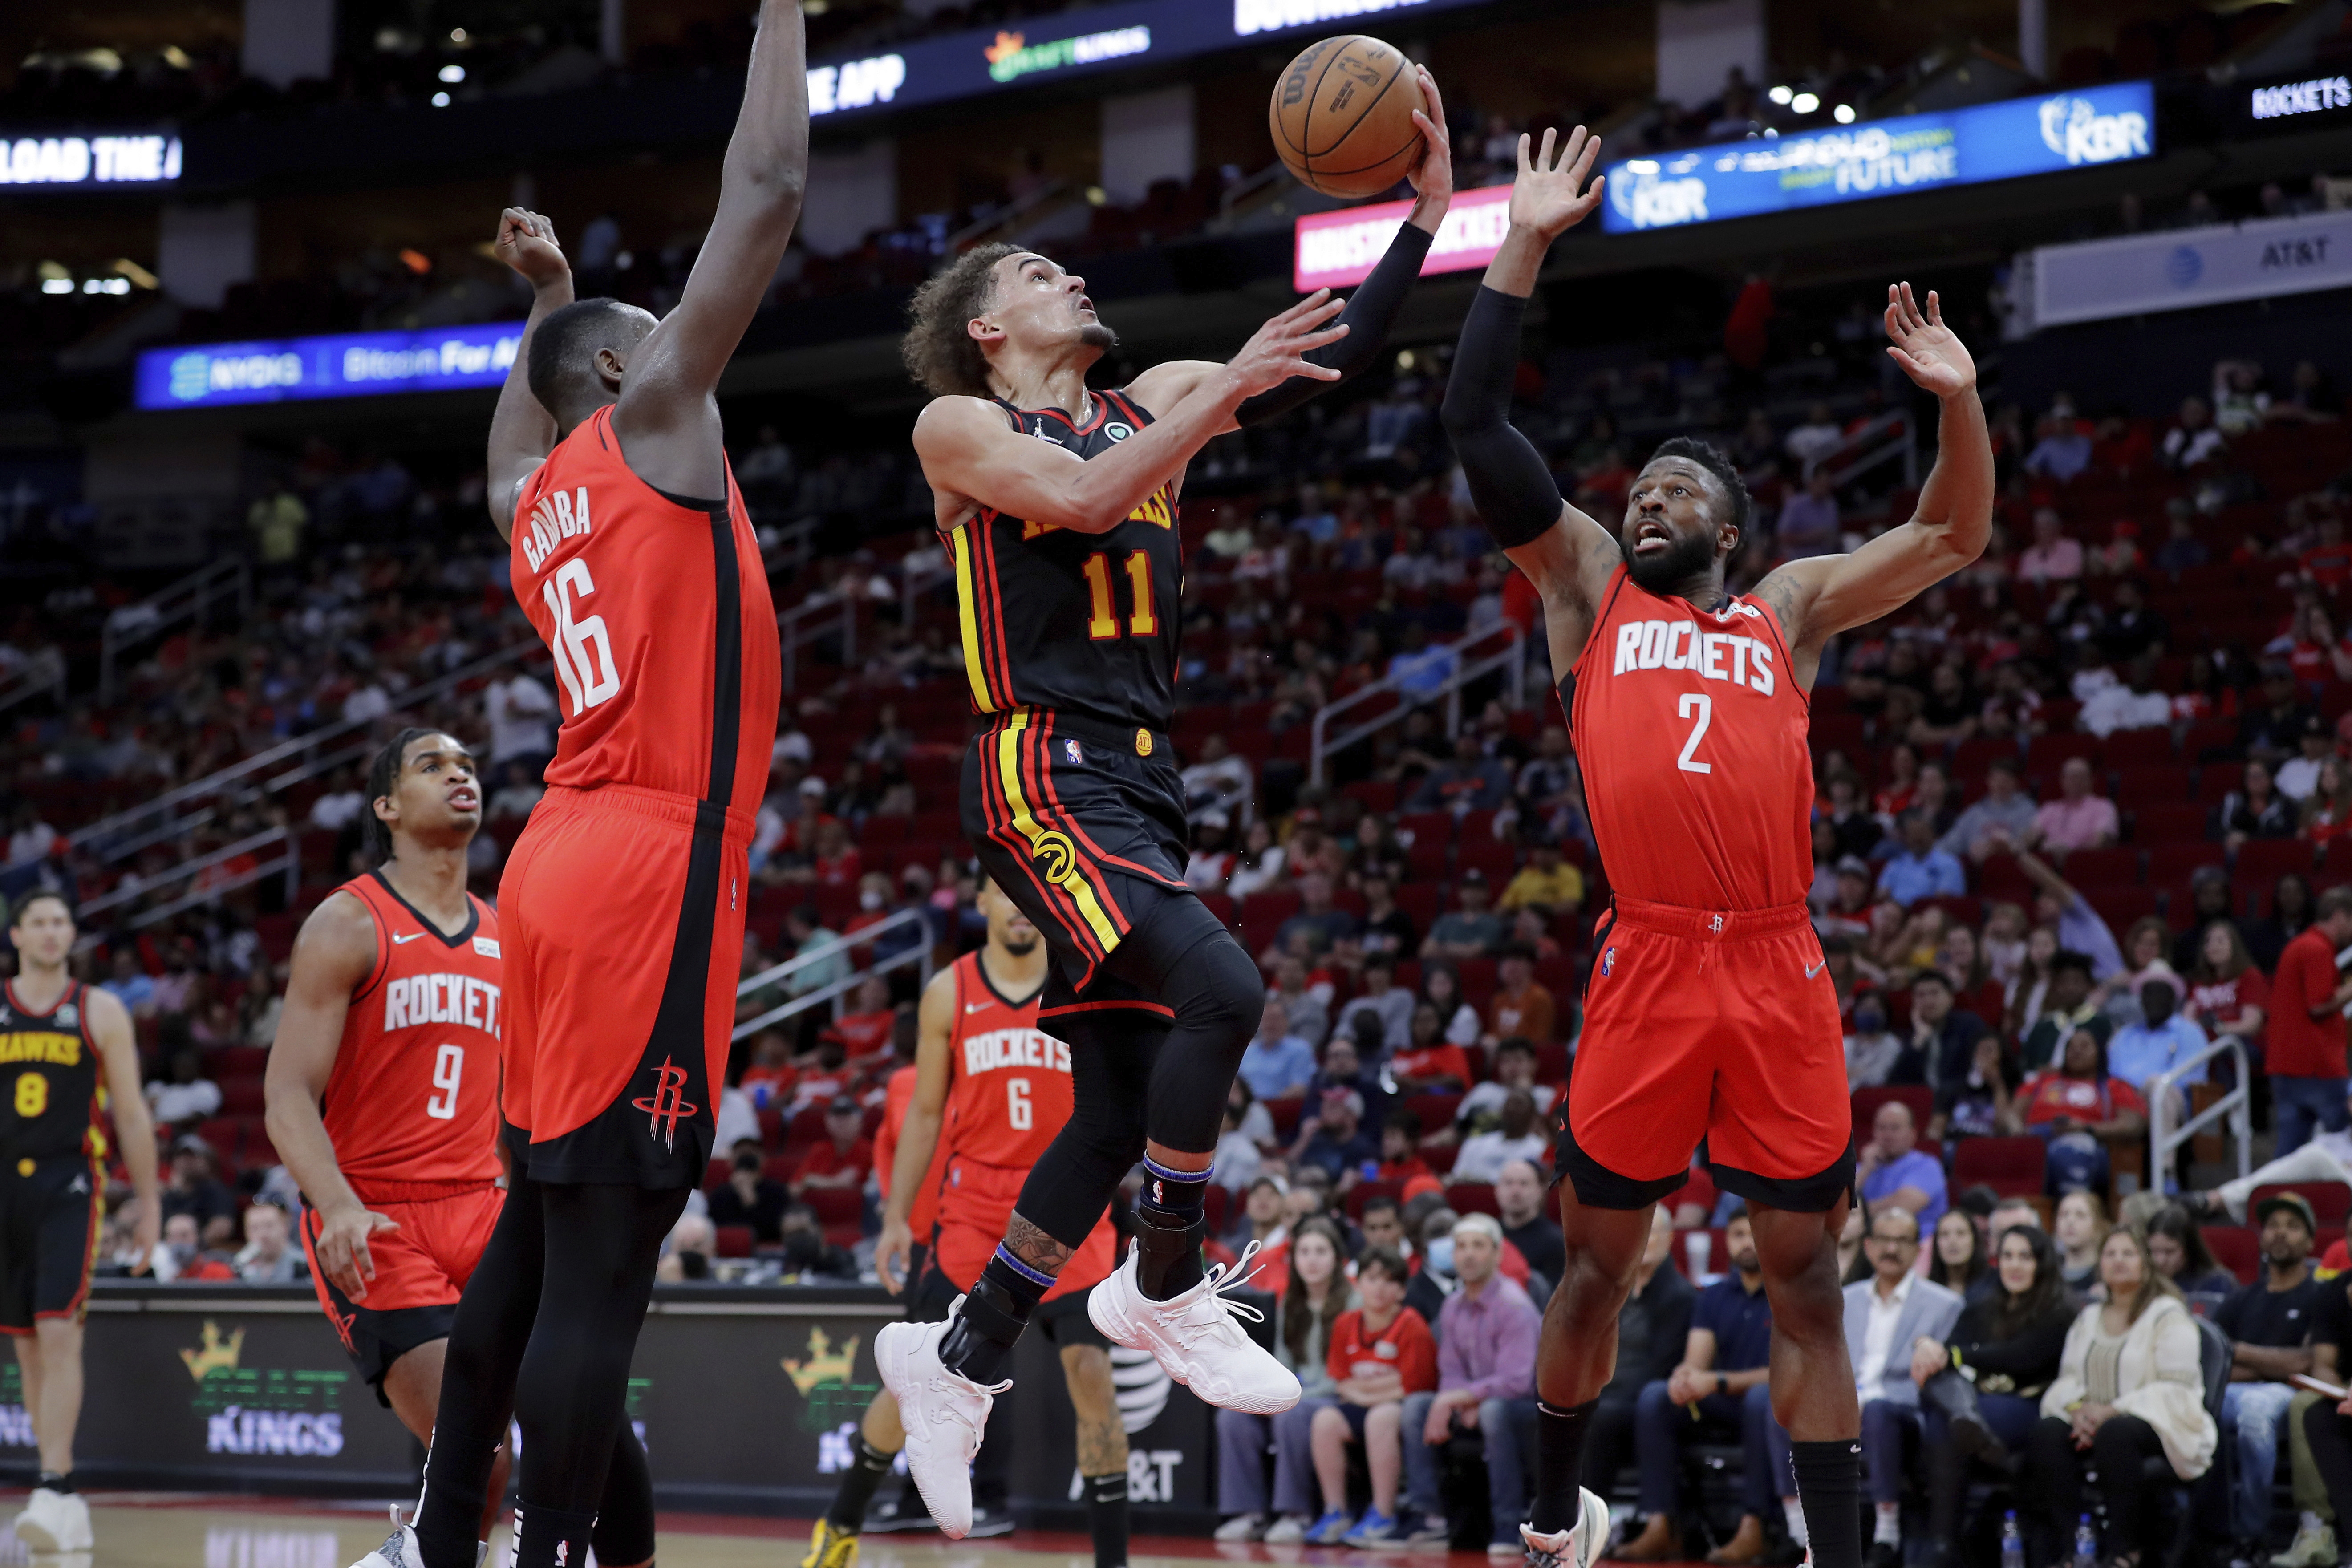 Hawks beat Rockets, 130-114, but stay in ninth spot for play-in